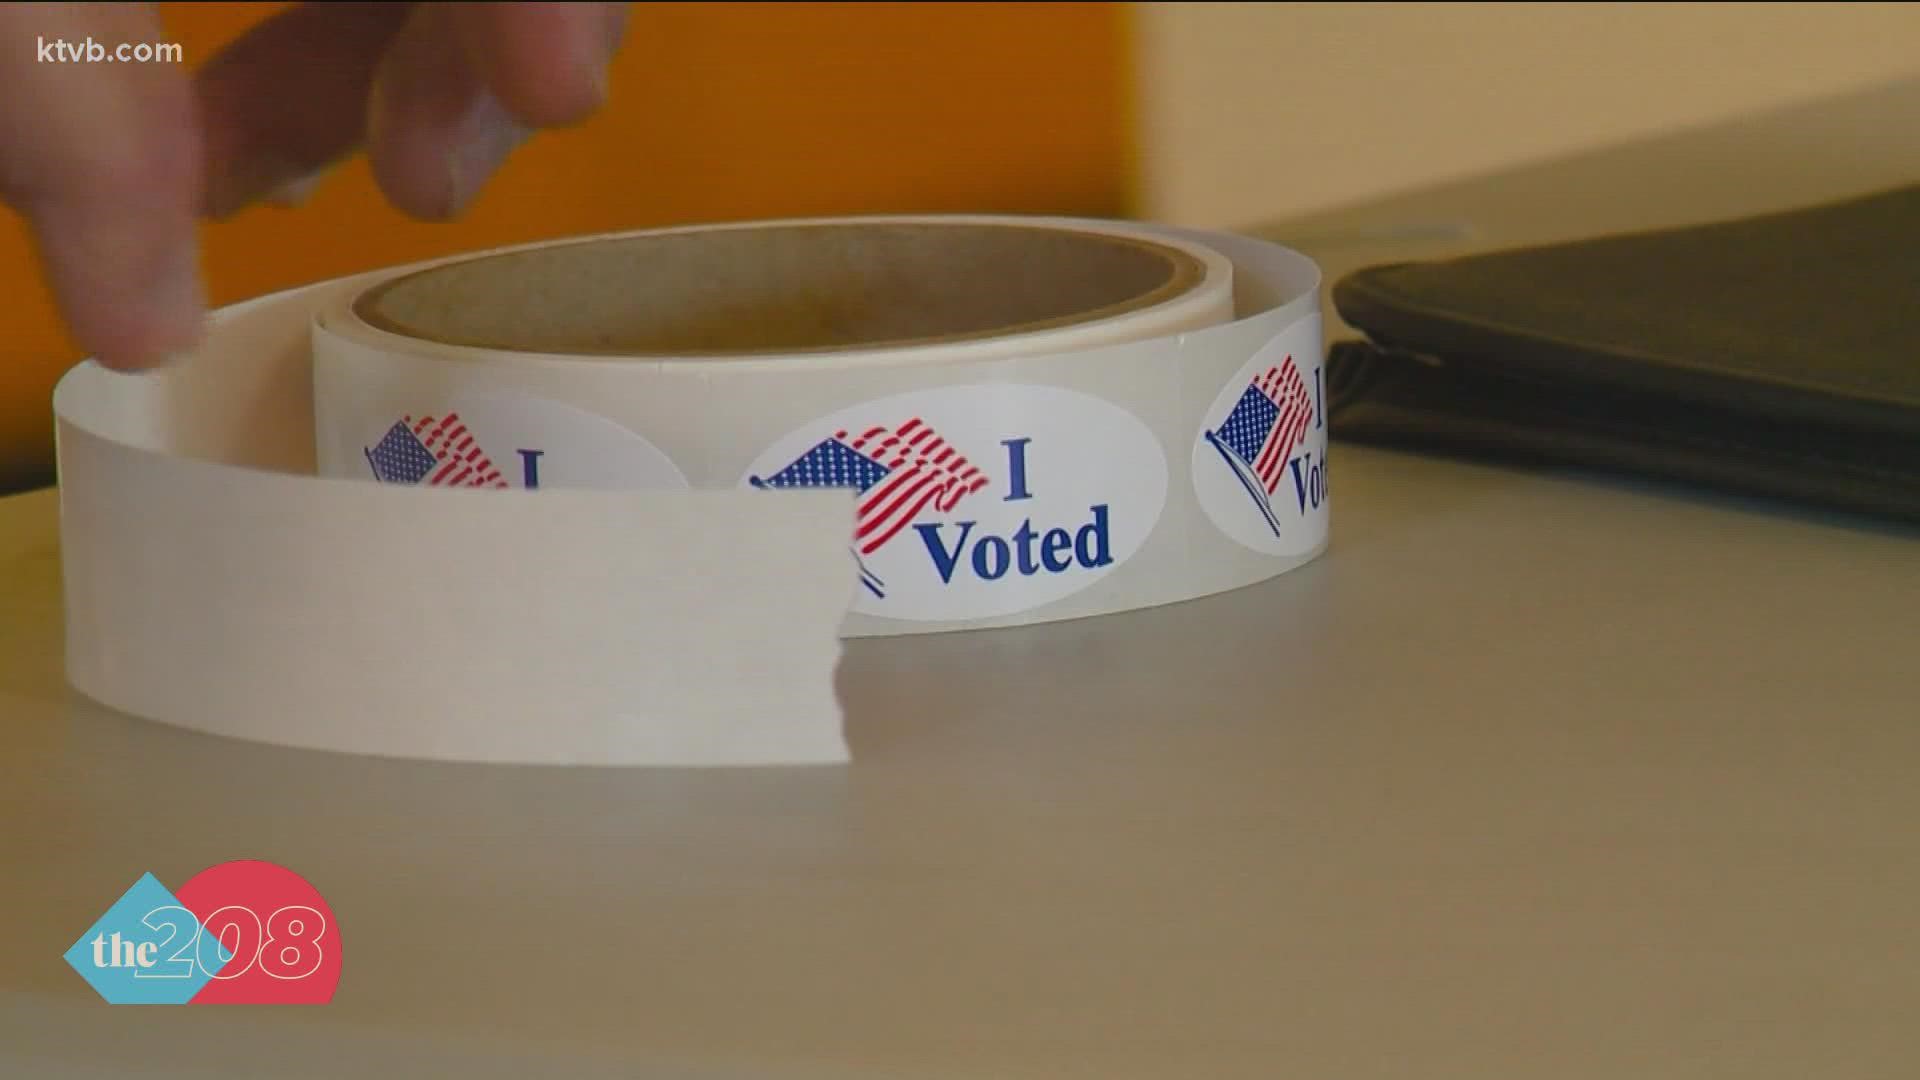 A Boise State professor says the goal of holding non-partisan elections is to get politics out of running a city.